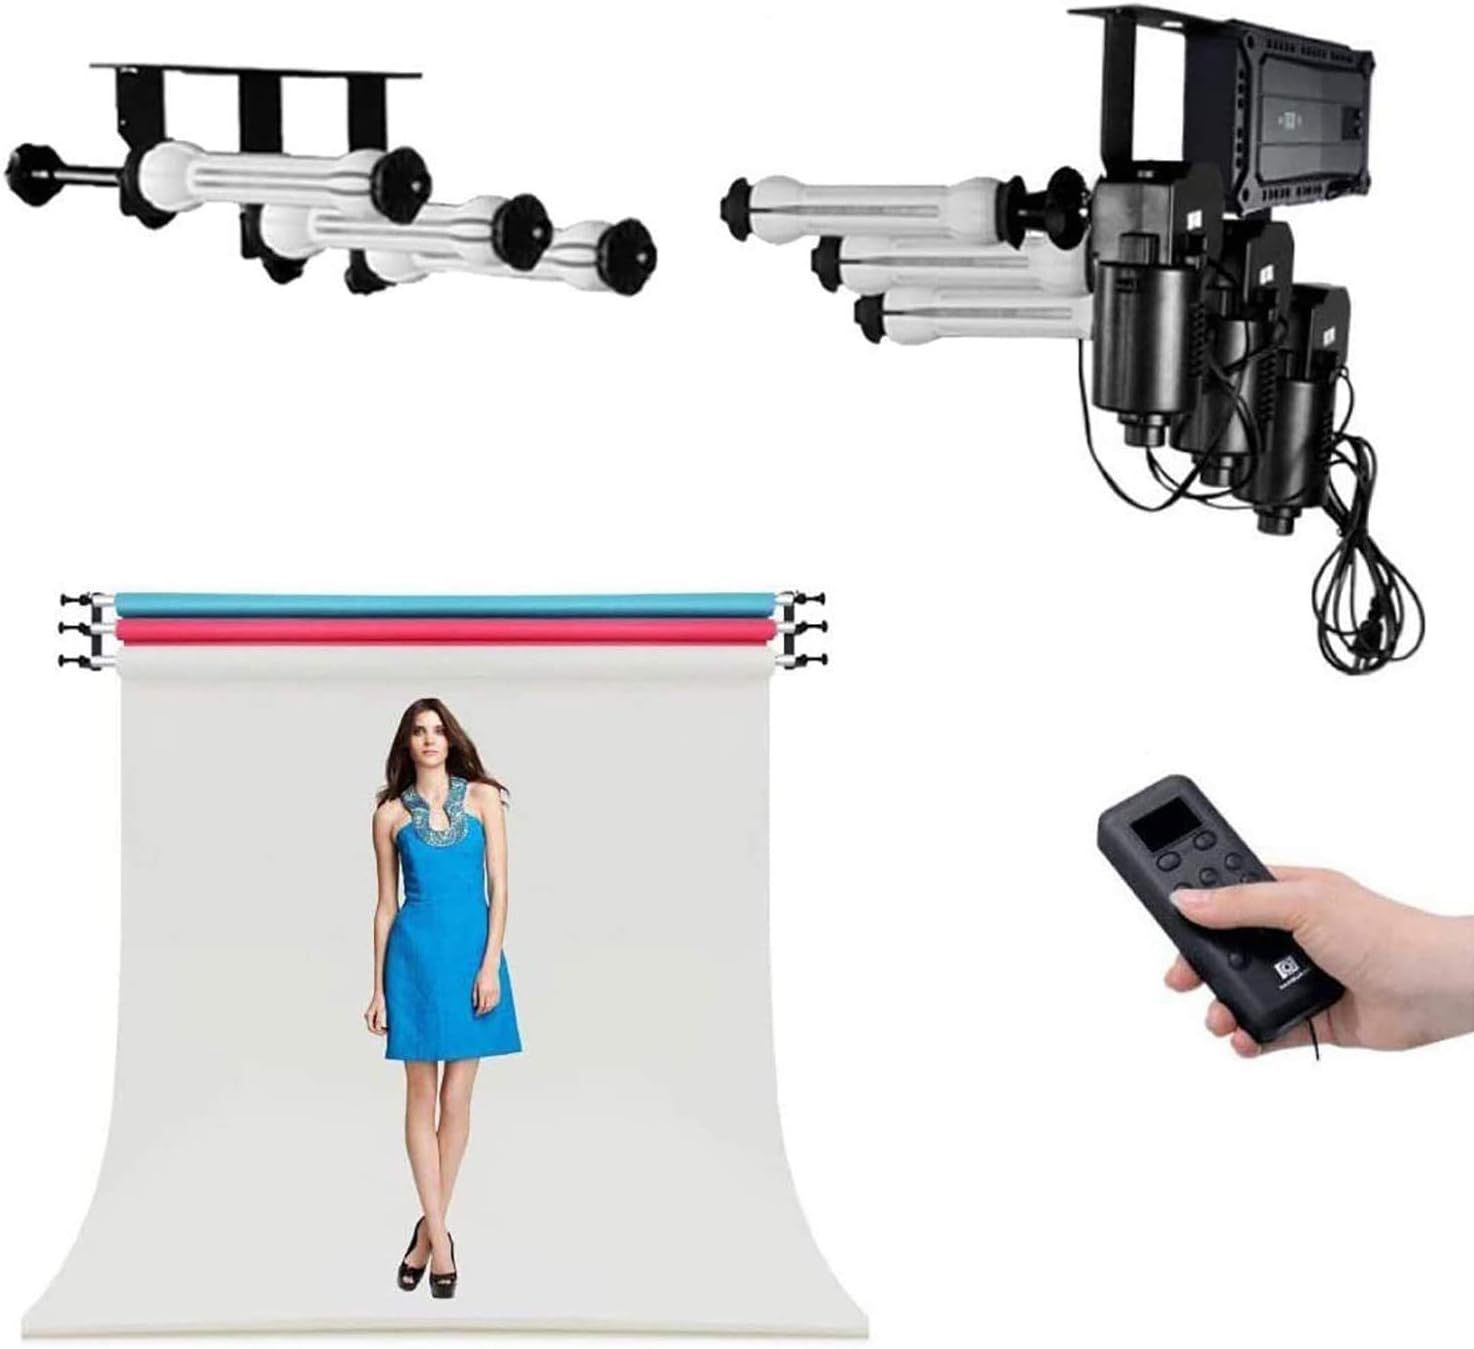 Remote control 3-roller backdrop with 10x15 ft texture fabric backdrop